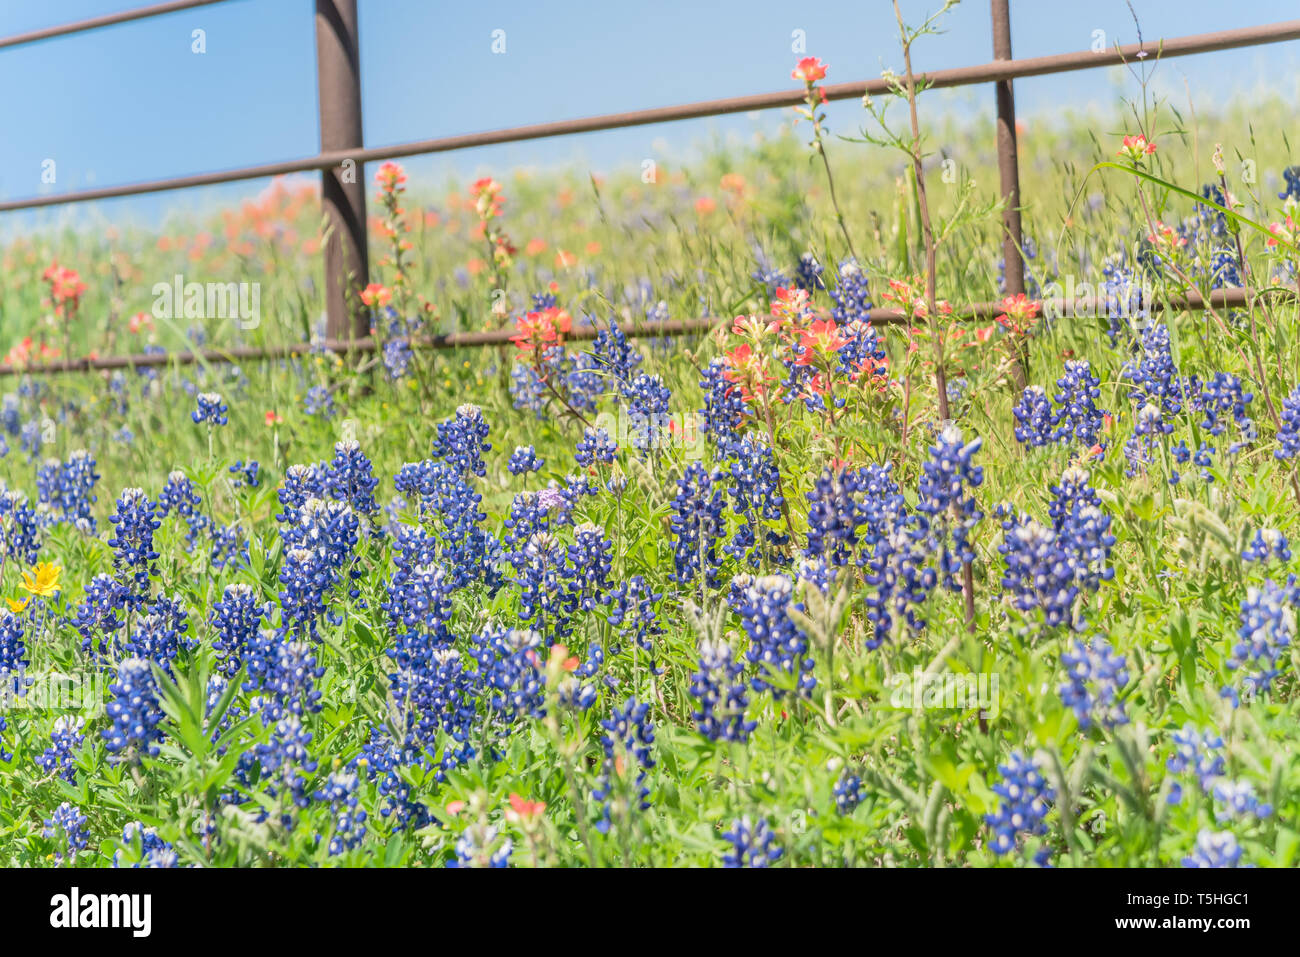 Indian Paintbrush and Bluebonnet blooming along old metal fence Stock Photo